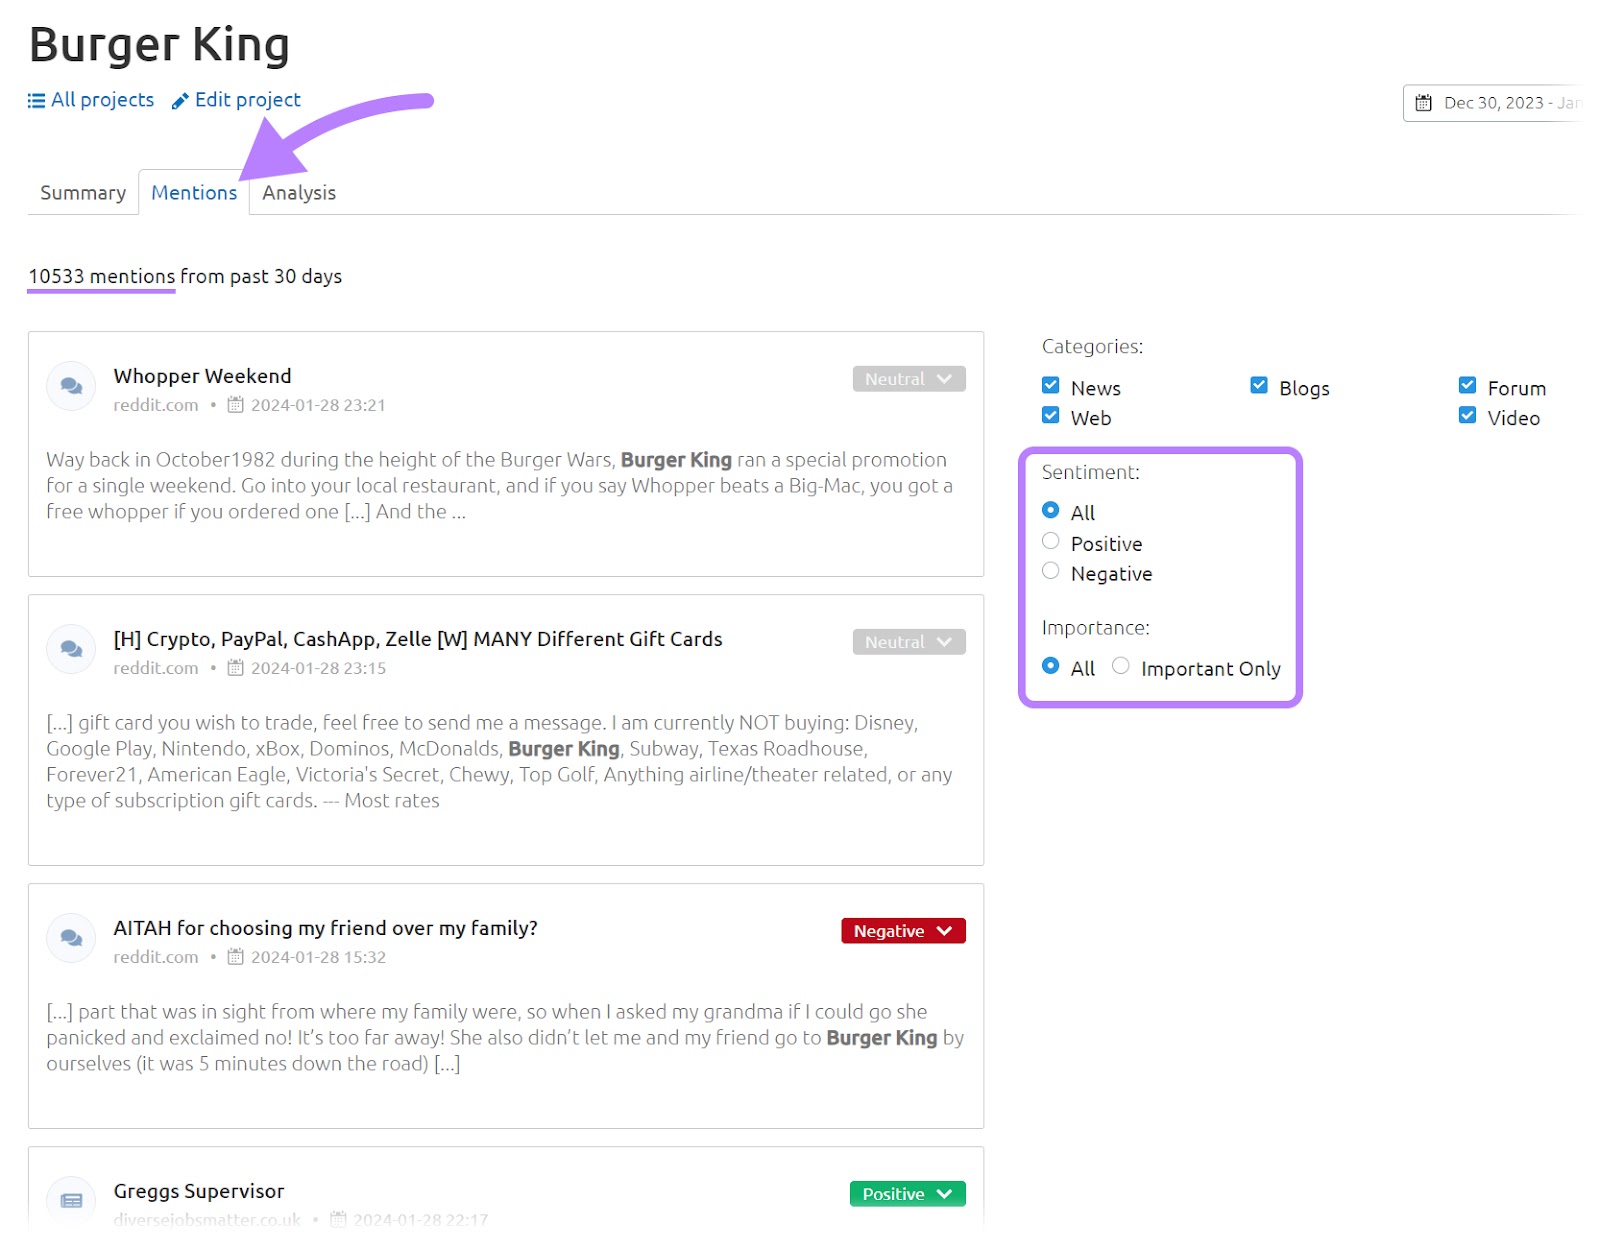 "Mentions" tab for Burger King in Media Monitoring app